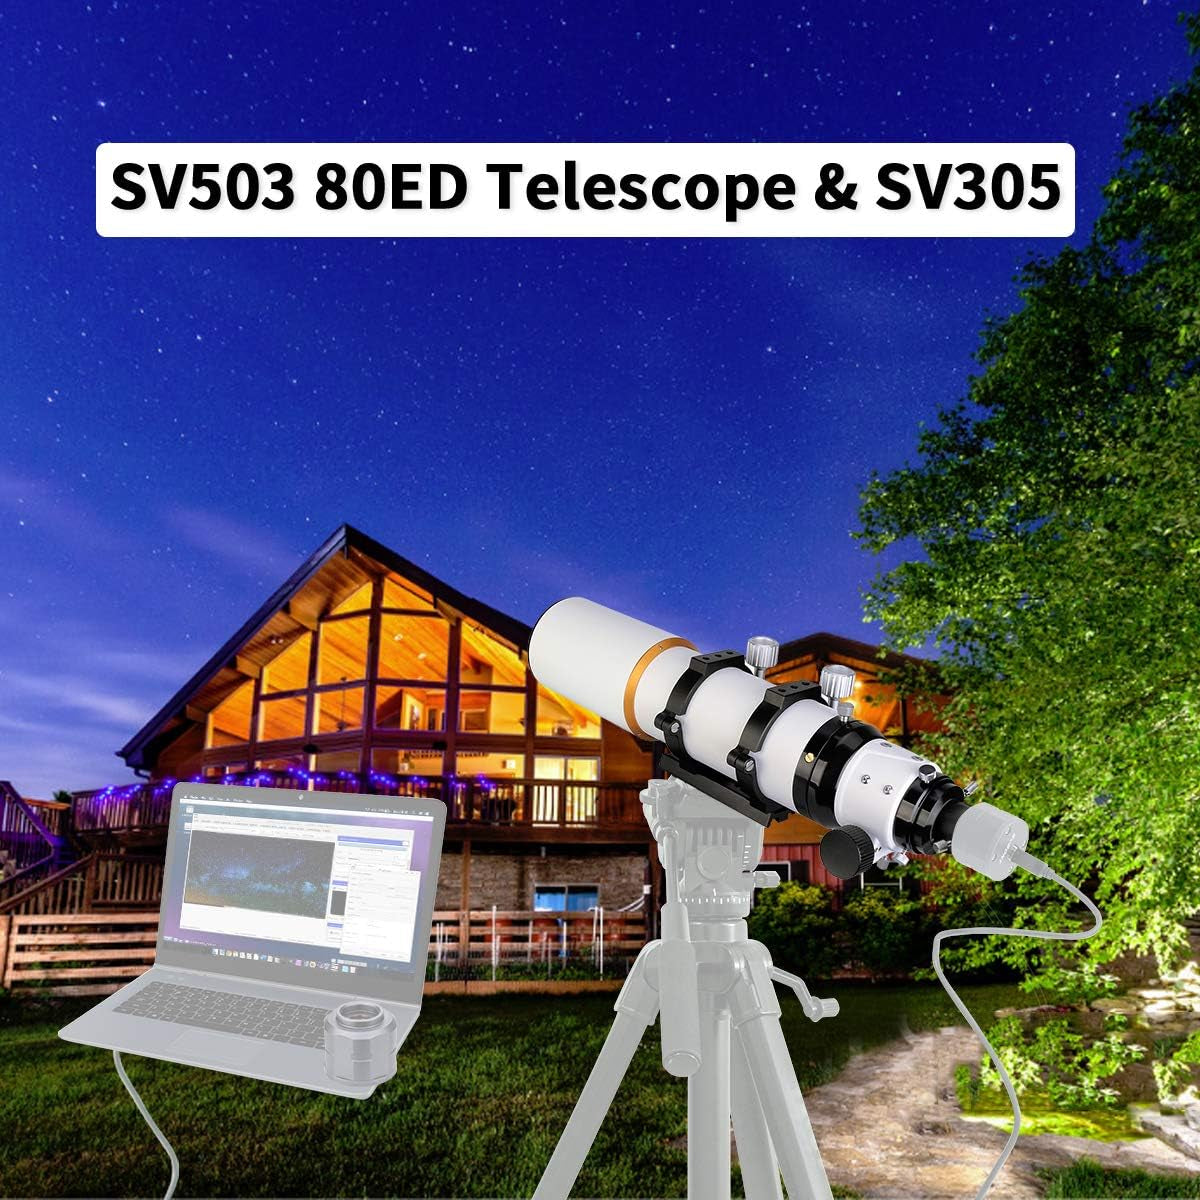 SV503 Telescope, 80ED F7 Telescope OTA with Focal Length 560Mm, Compact and Portable Tube for Exceptional Viewing and Astrophotography